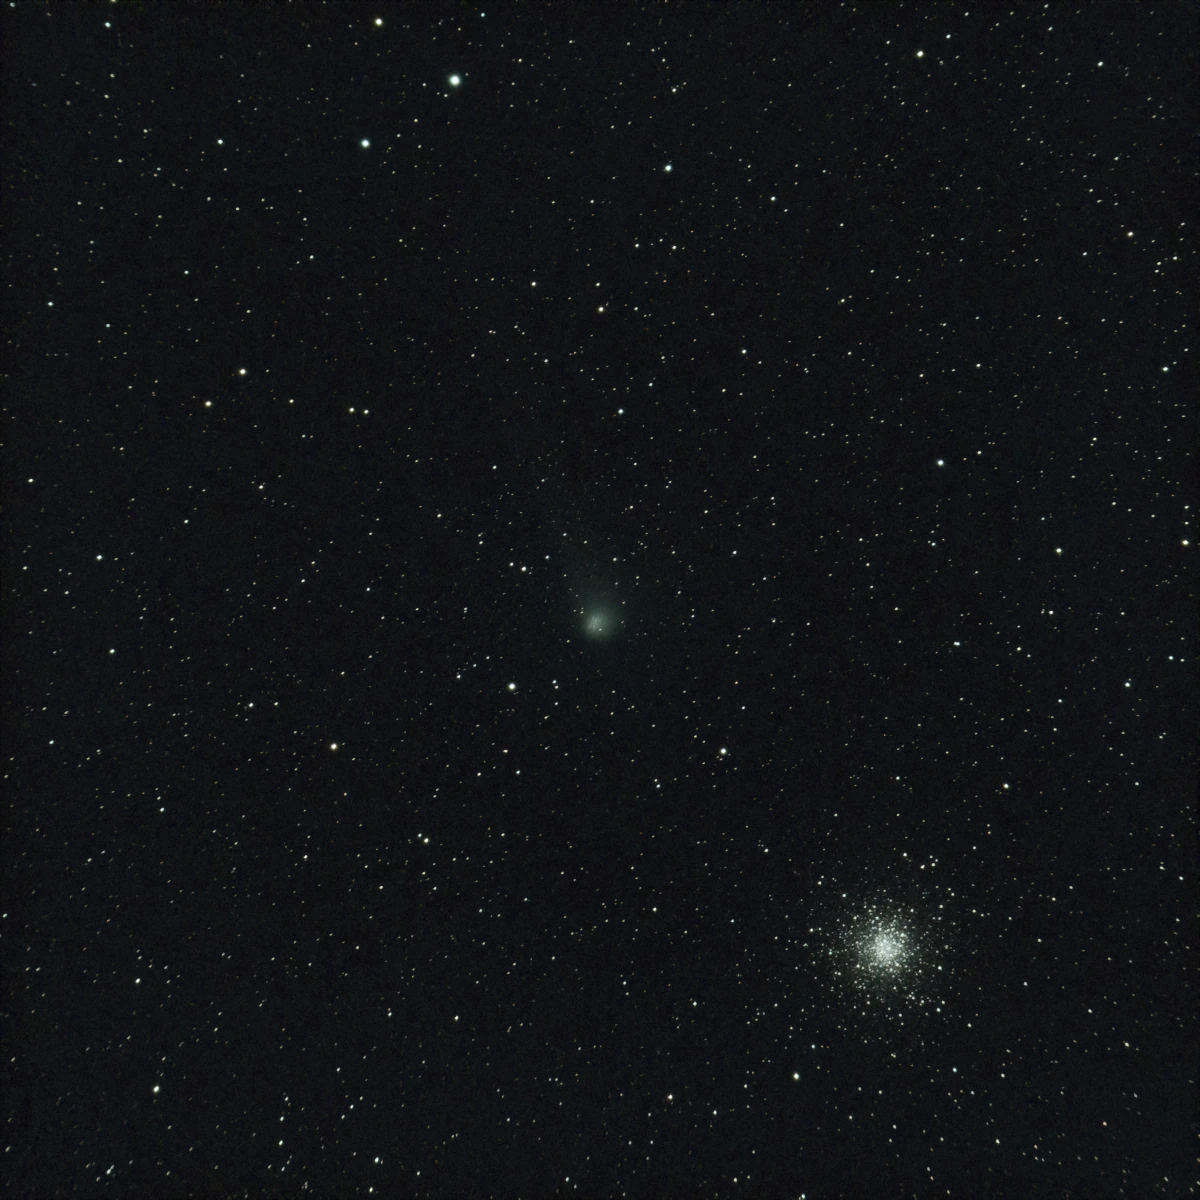 The comet C/2017 K2 (PANSTARRS) and the globular cluster M10